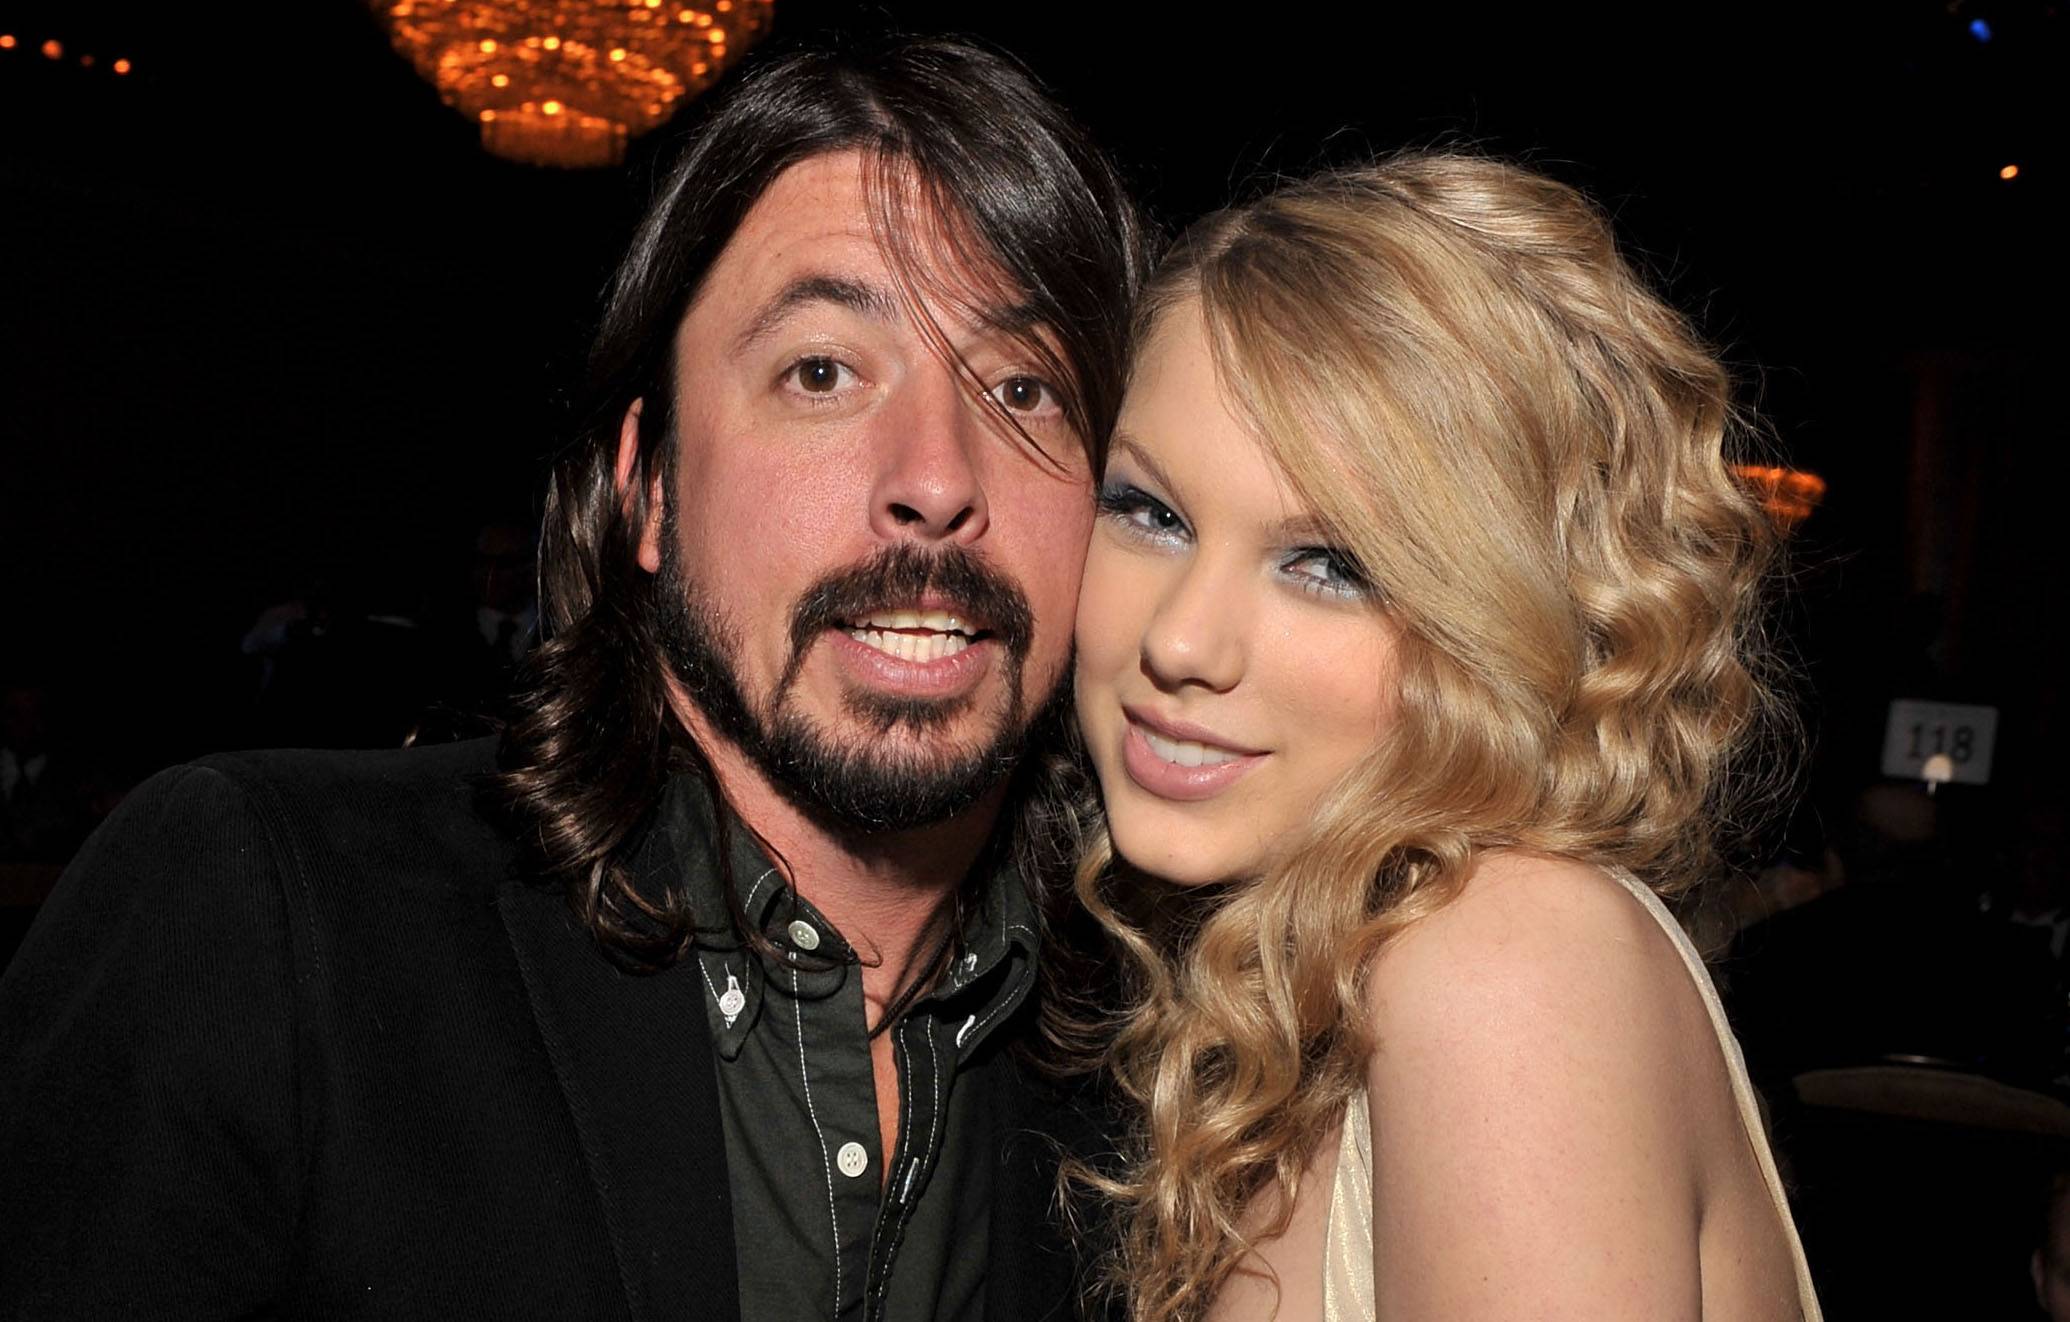 Dave Portnoy’s message to Dave Grohl after Taylor Swift’s diss